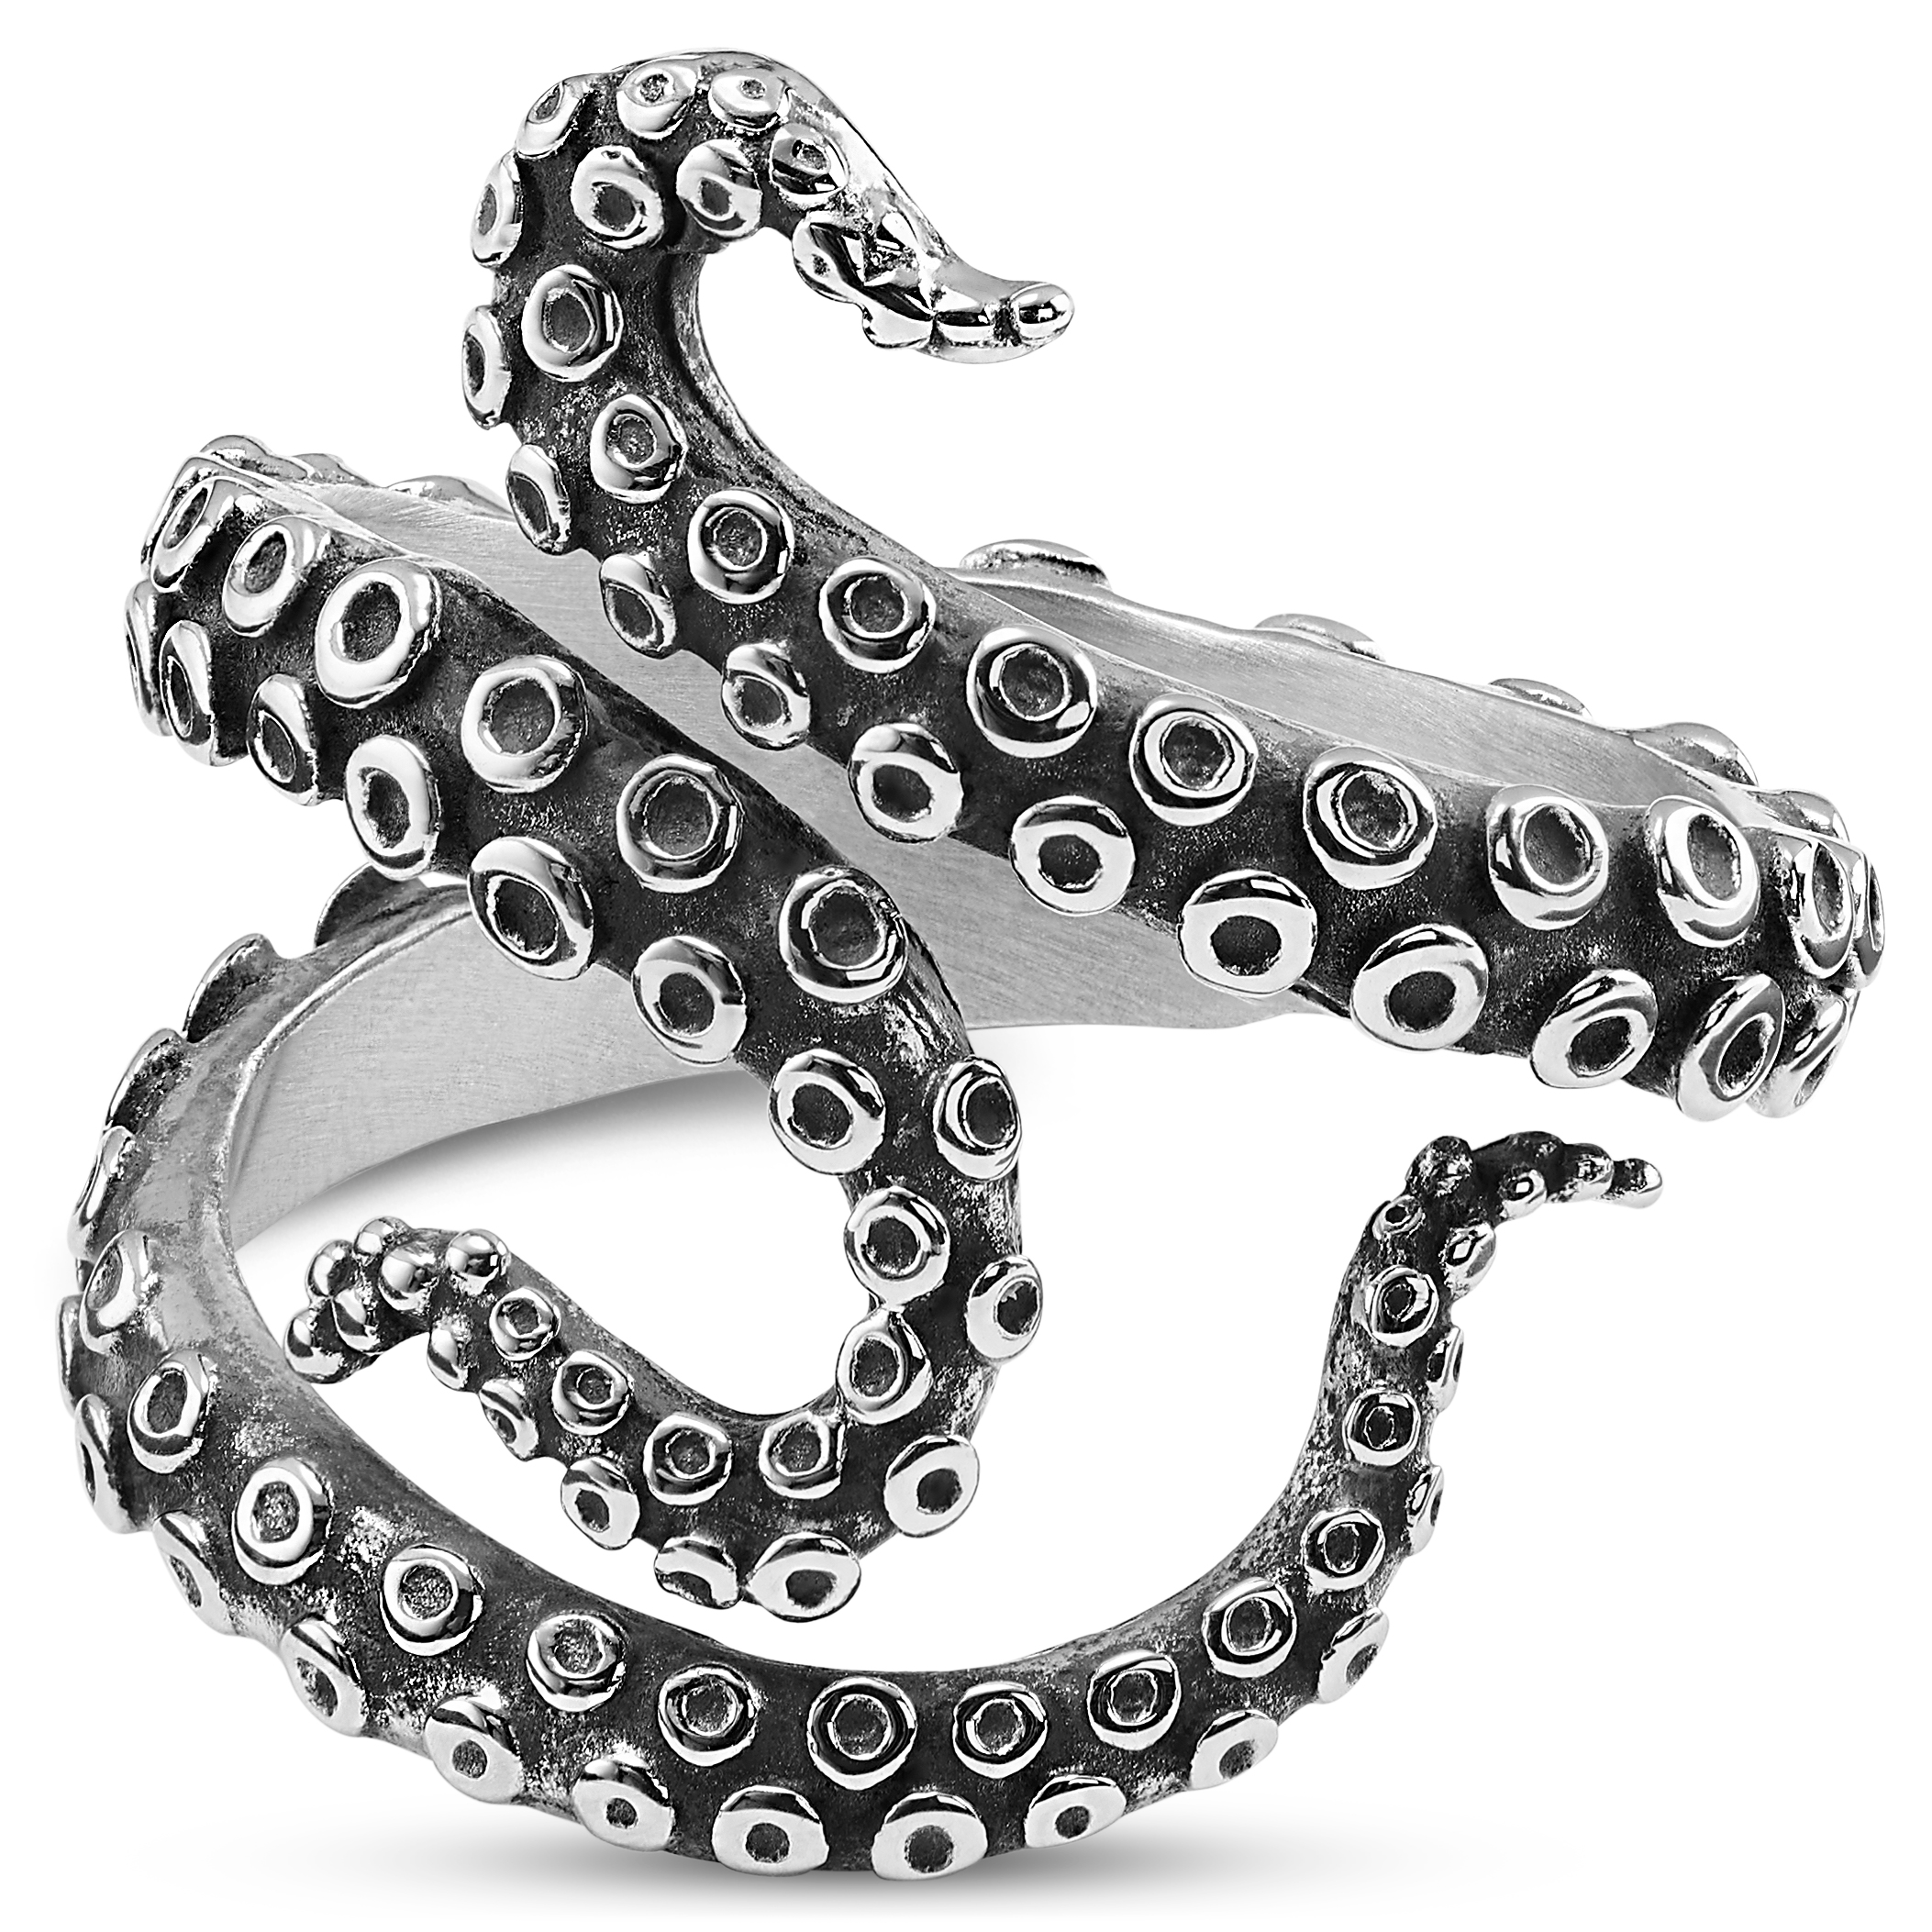 Silver-Tone Octopus Tentacle Ring - Silver-Tone - Stainless Steel - Steel Rings - Nickel Free - Moody Mason - For Men